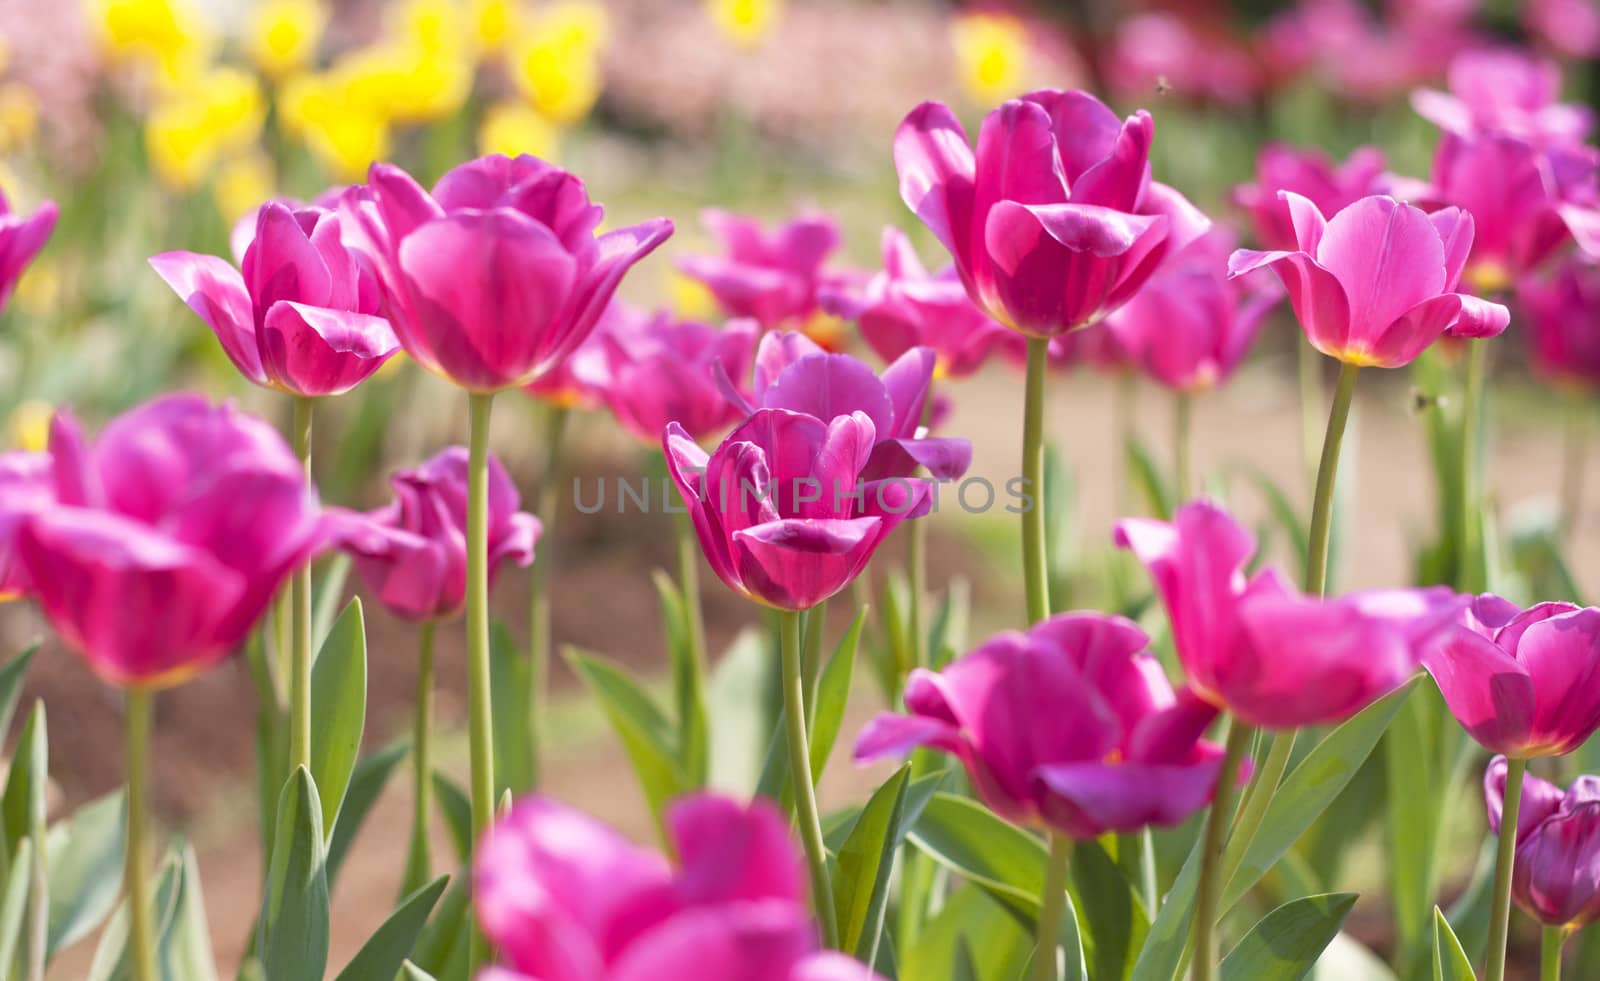 Tulips. by janniwet